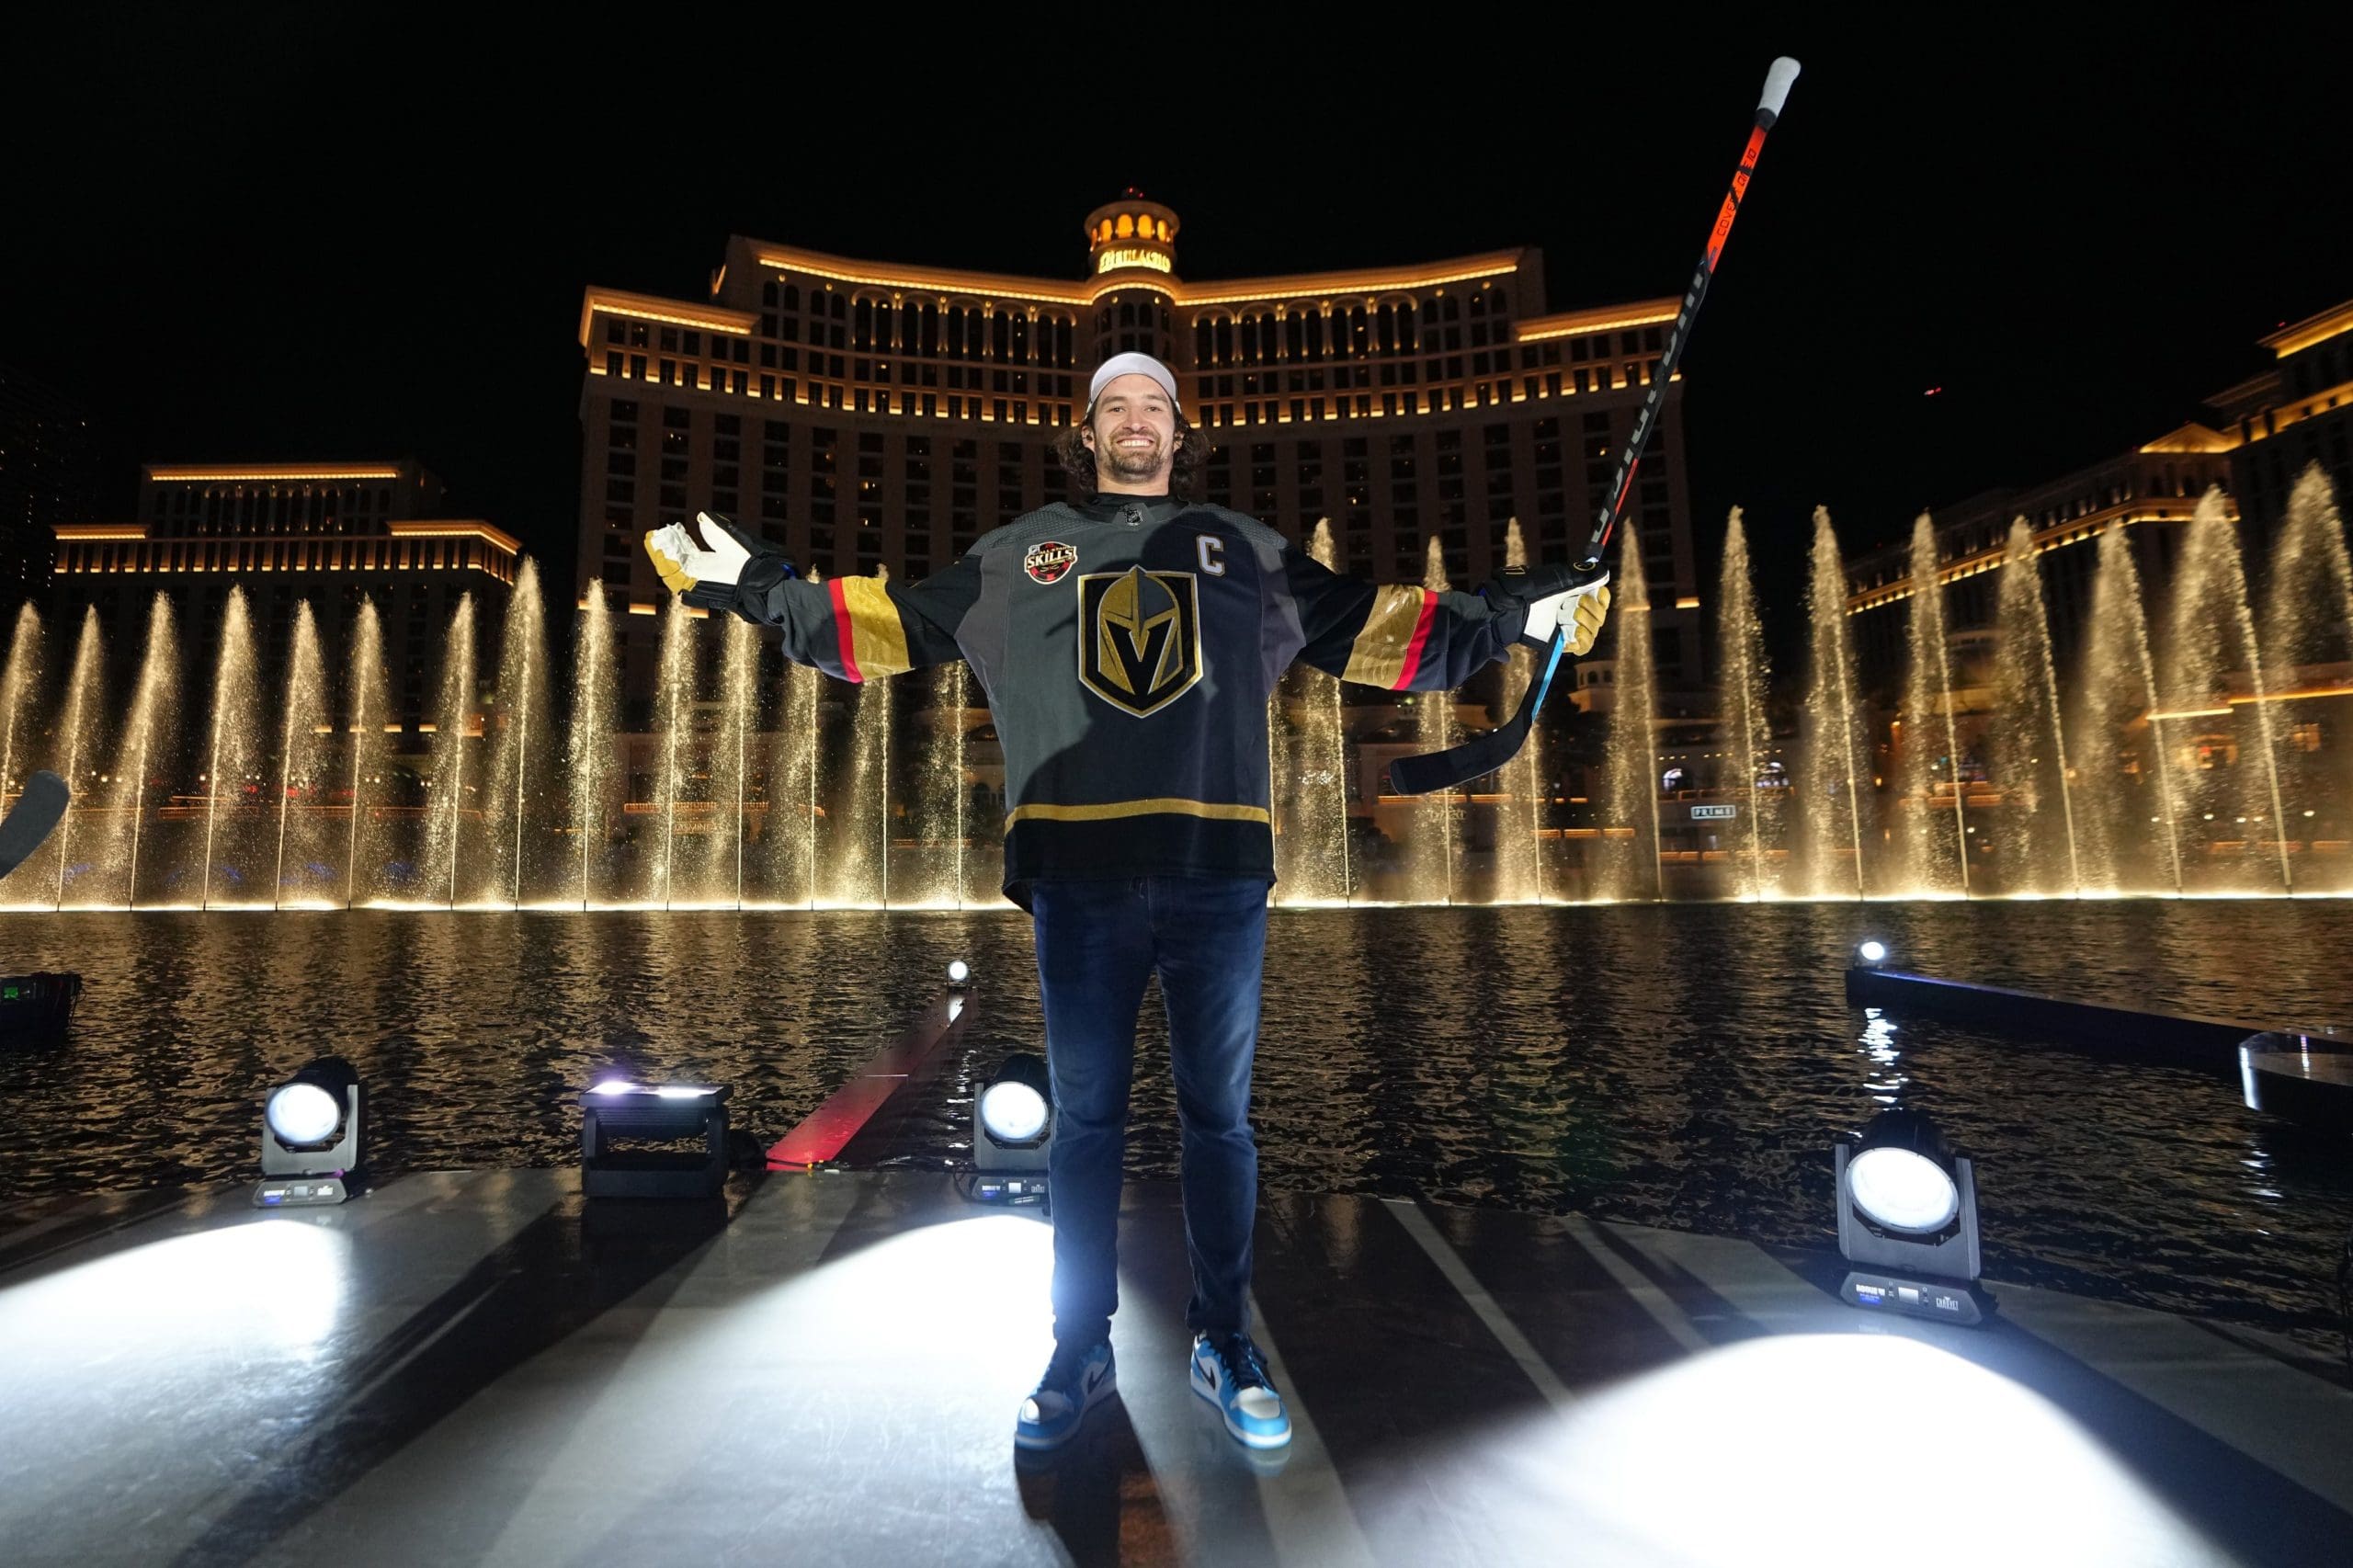 Golden Knights to host 2022 NHL All-Star Game in Las Vegas, Golden Knights